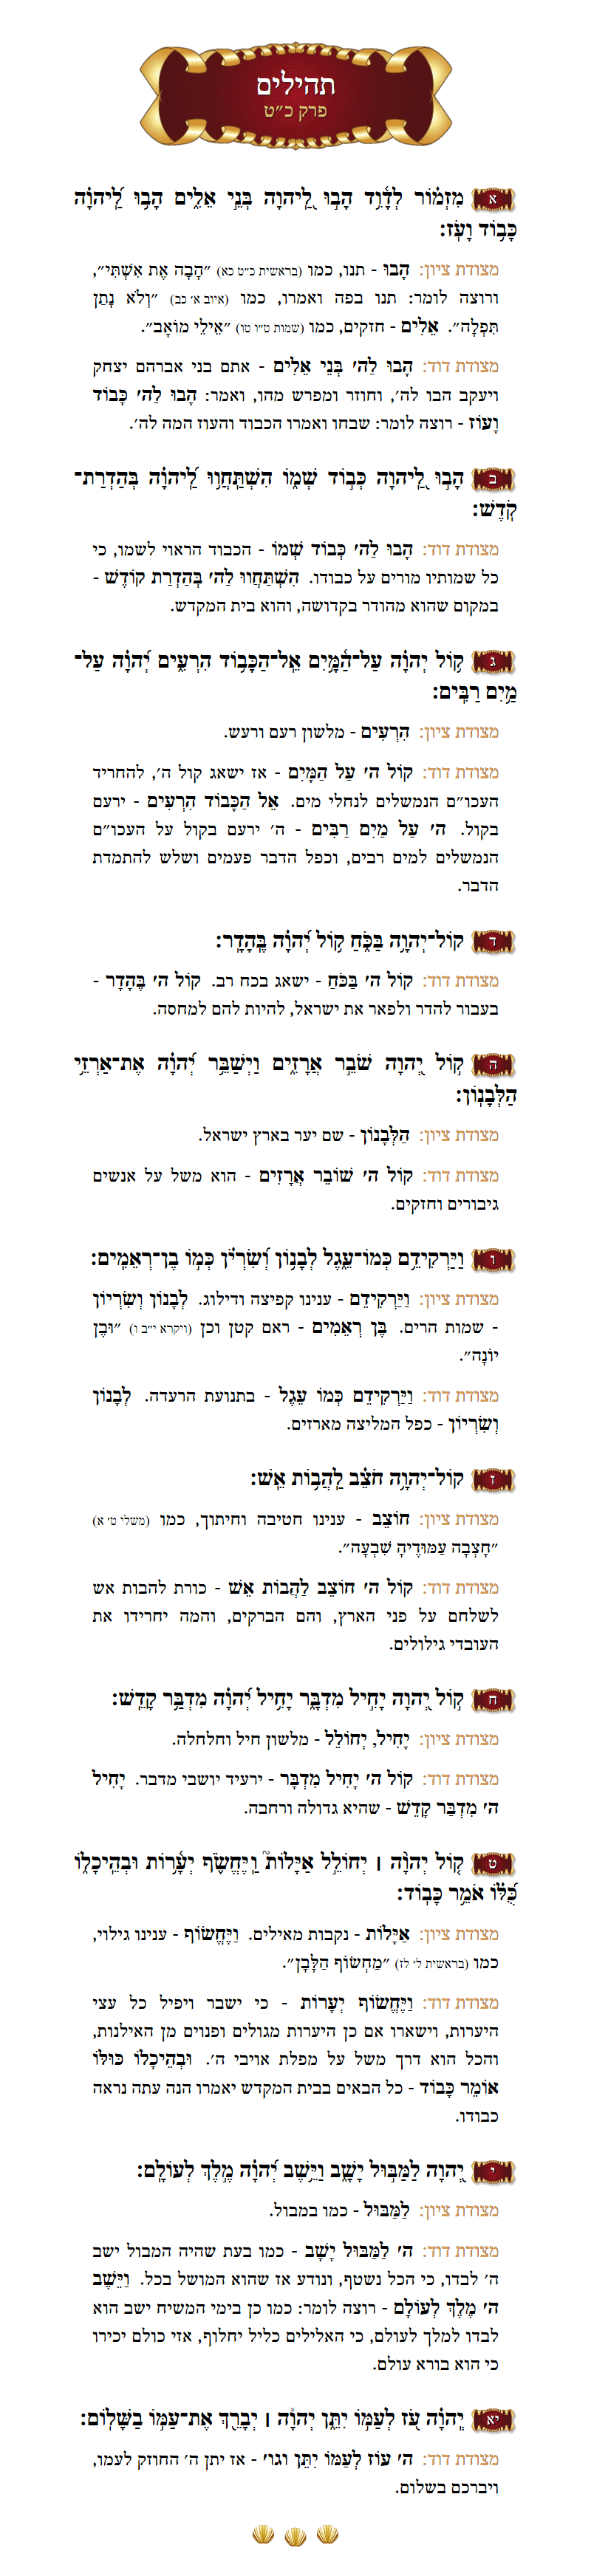 Sefer Tehillim Chapter 92 with commentary